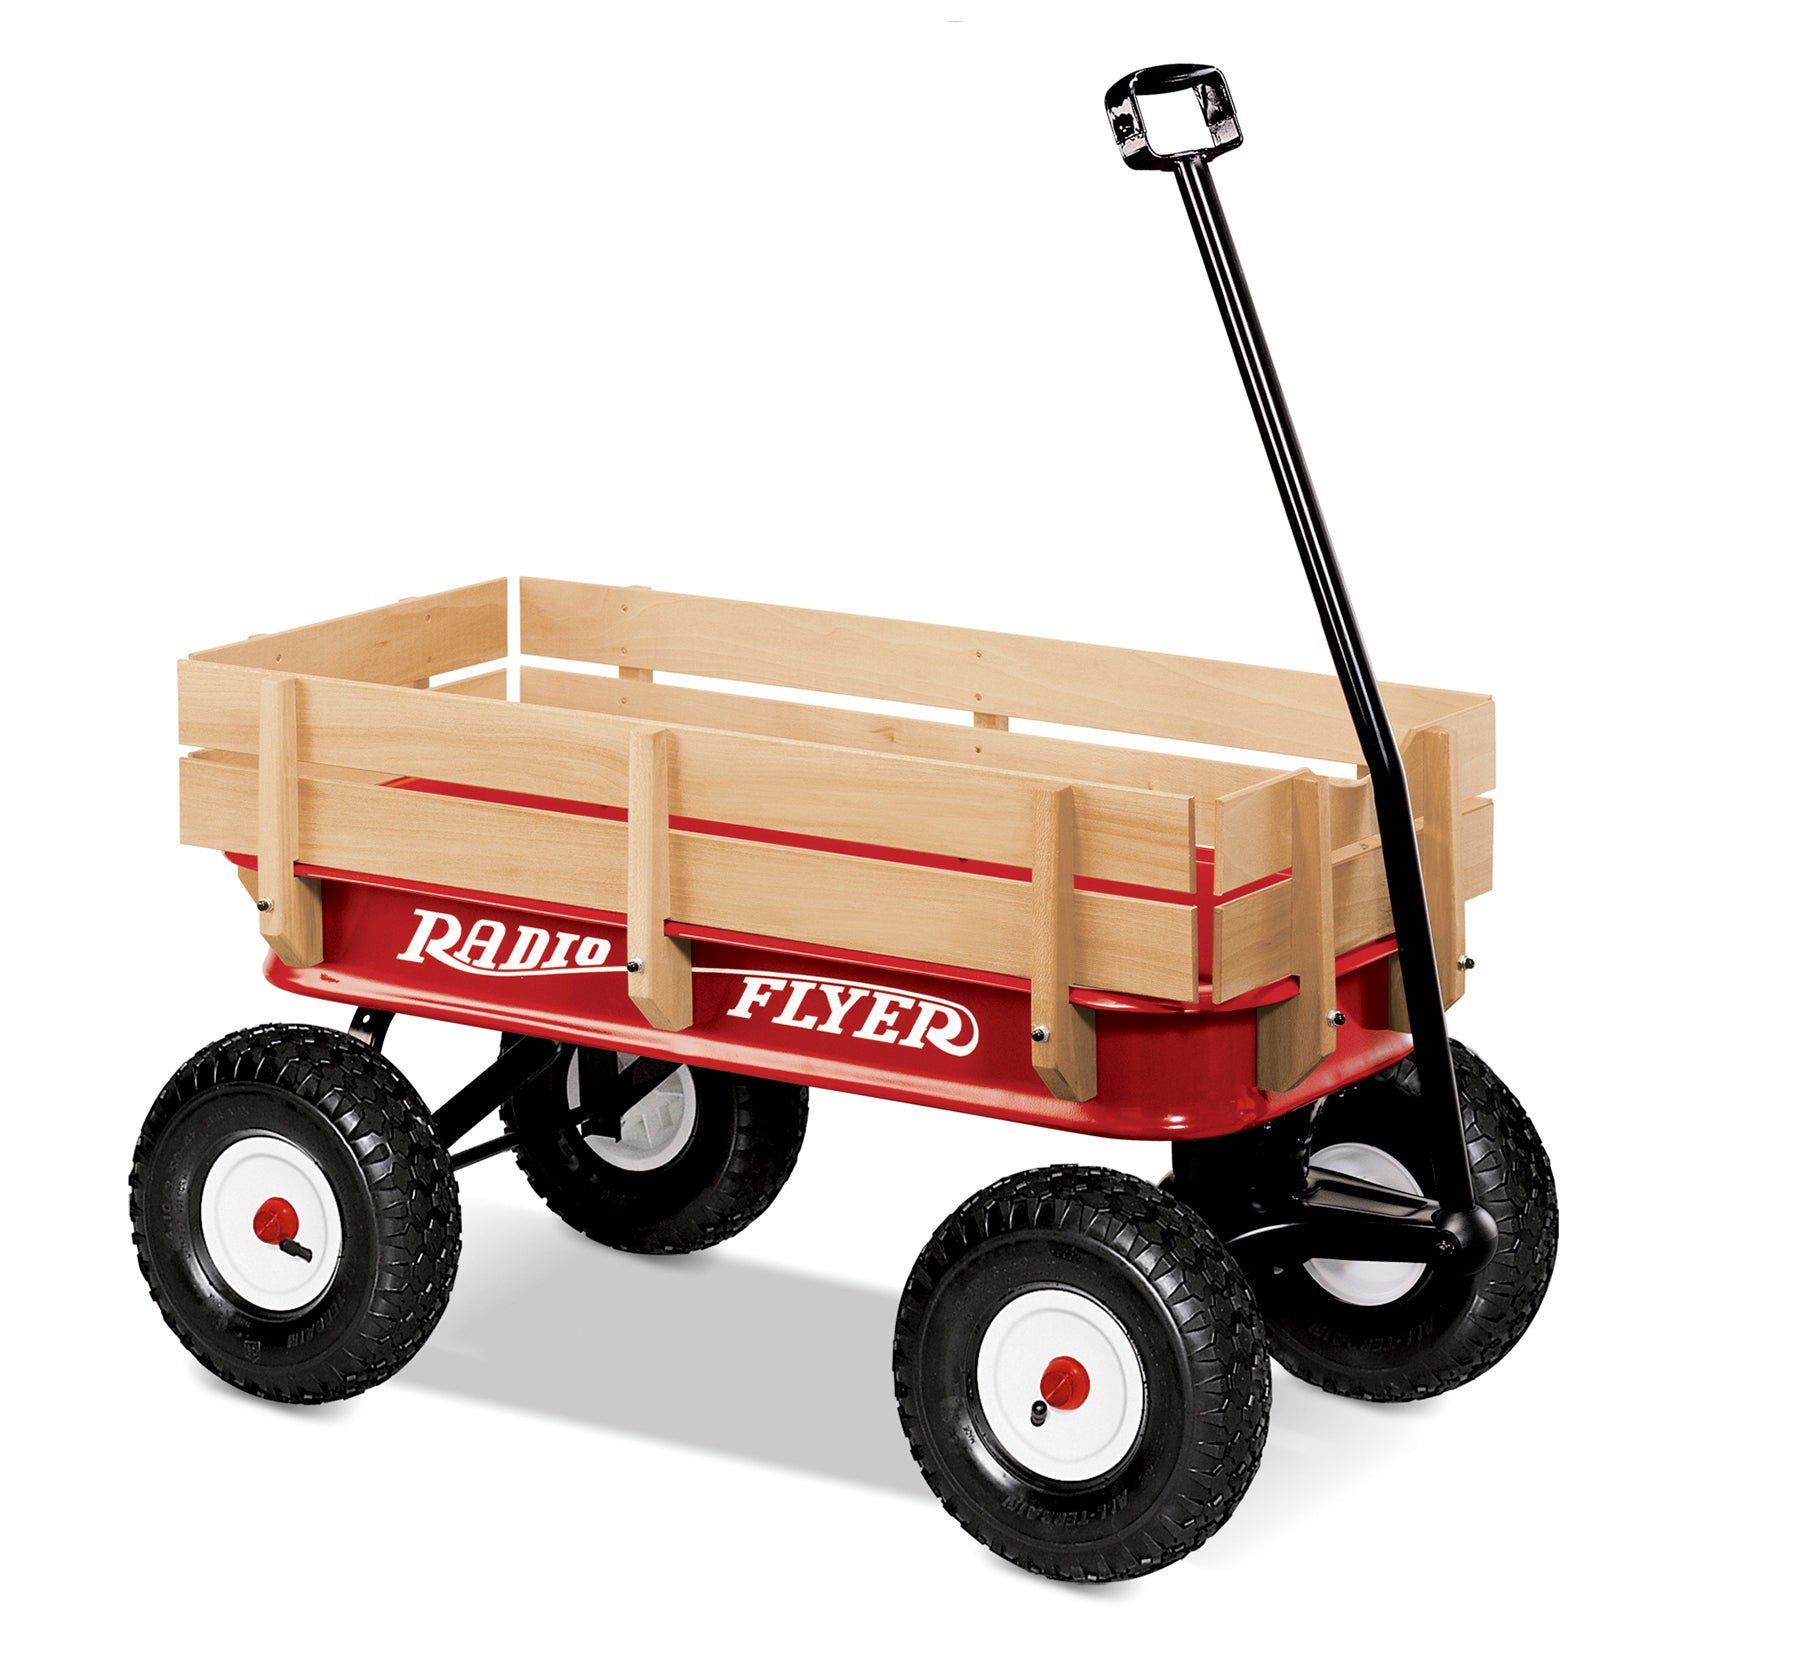 Radio Flyer Collections: Toys & Ride-Ons | Radio Flyer – Page 2